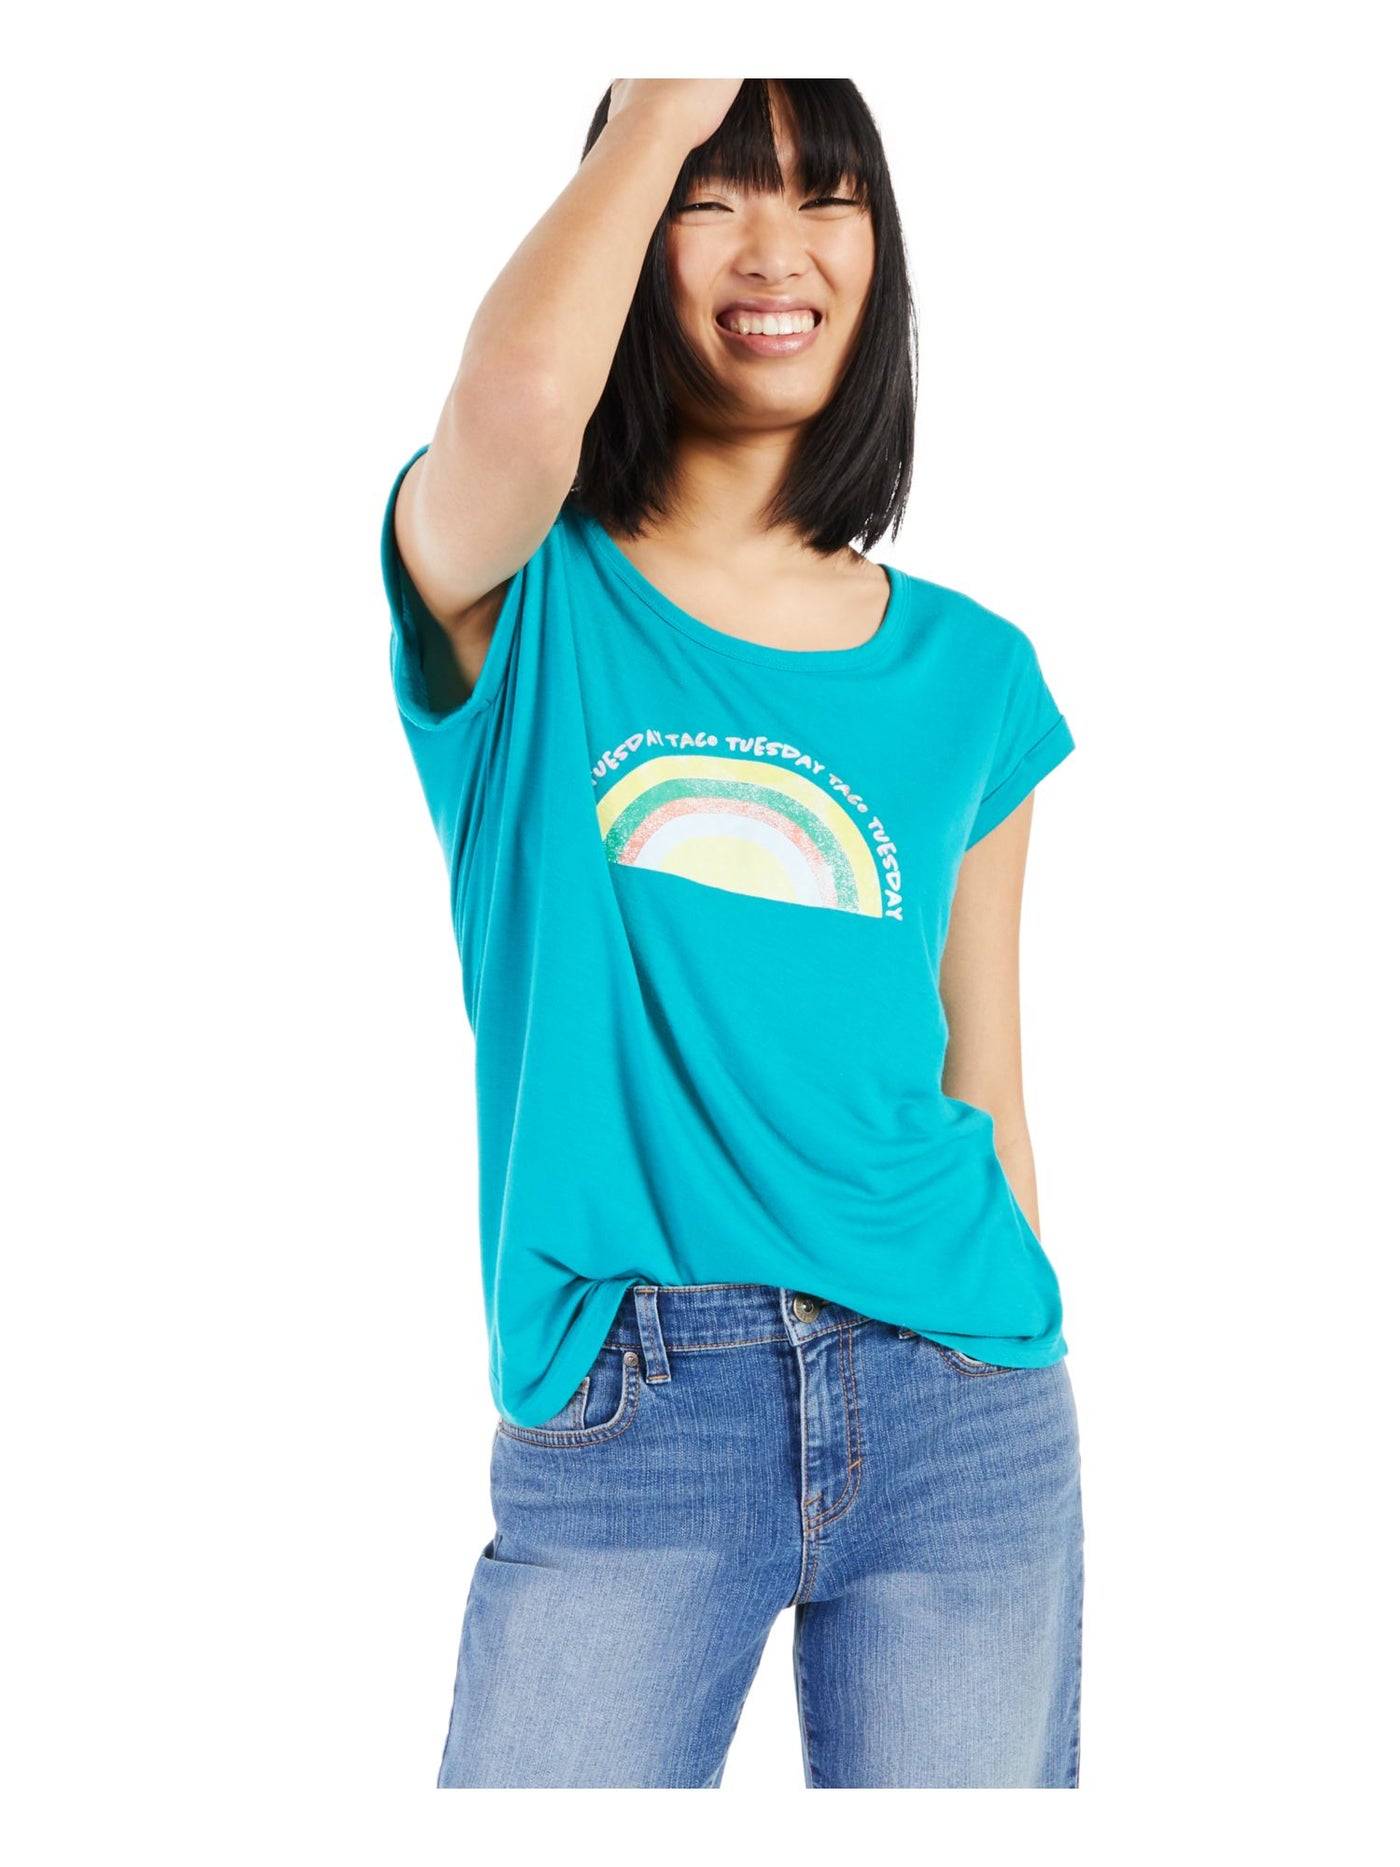 STYLE & COMPANY Womens Turquoise Stretch Graphic Short Sleeve Scoop Neck T-Shirt XS